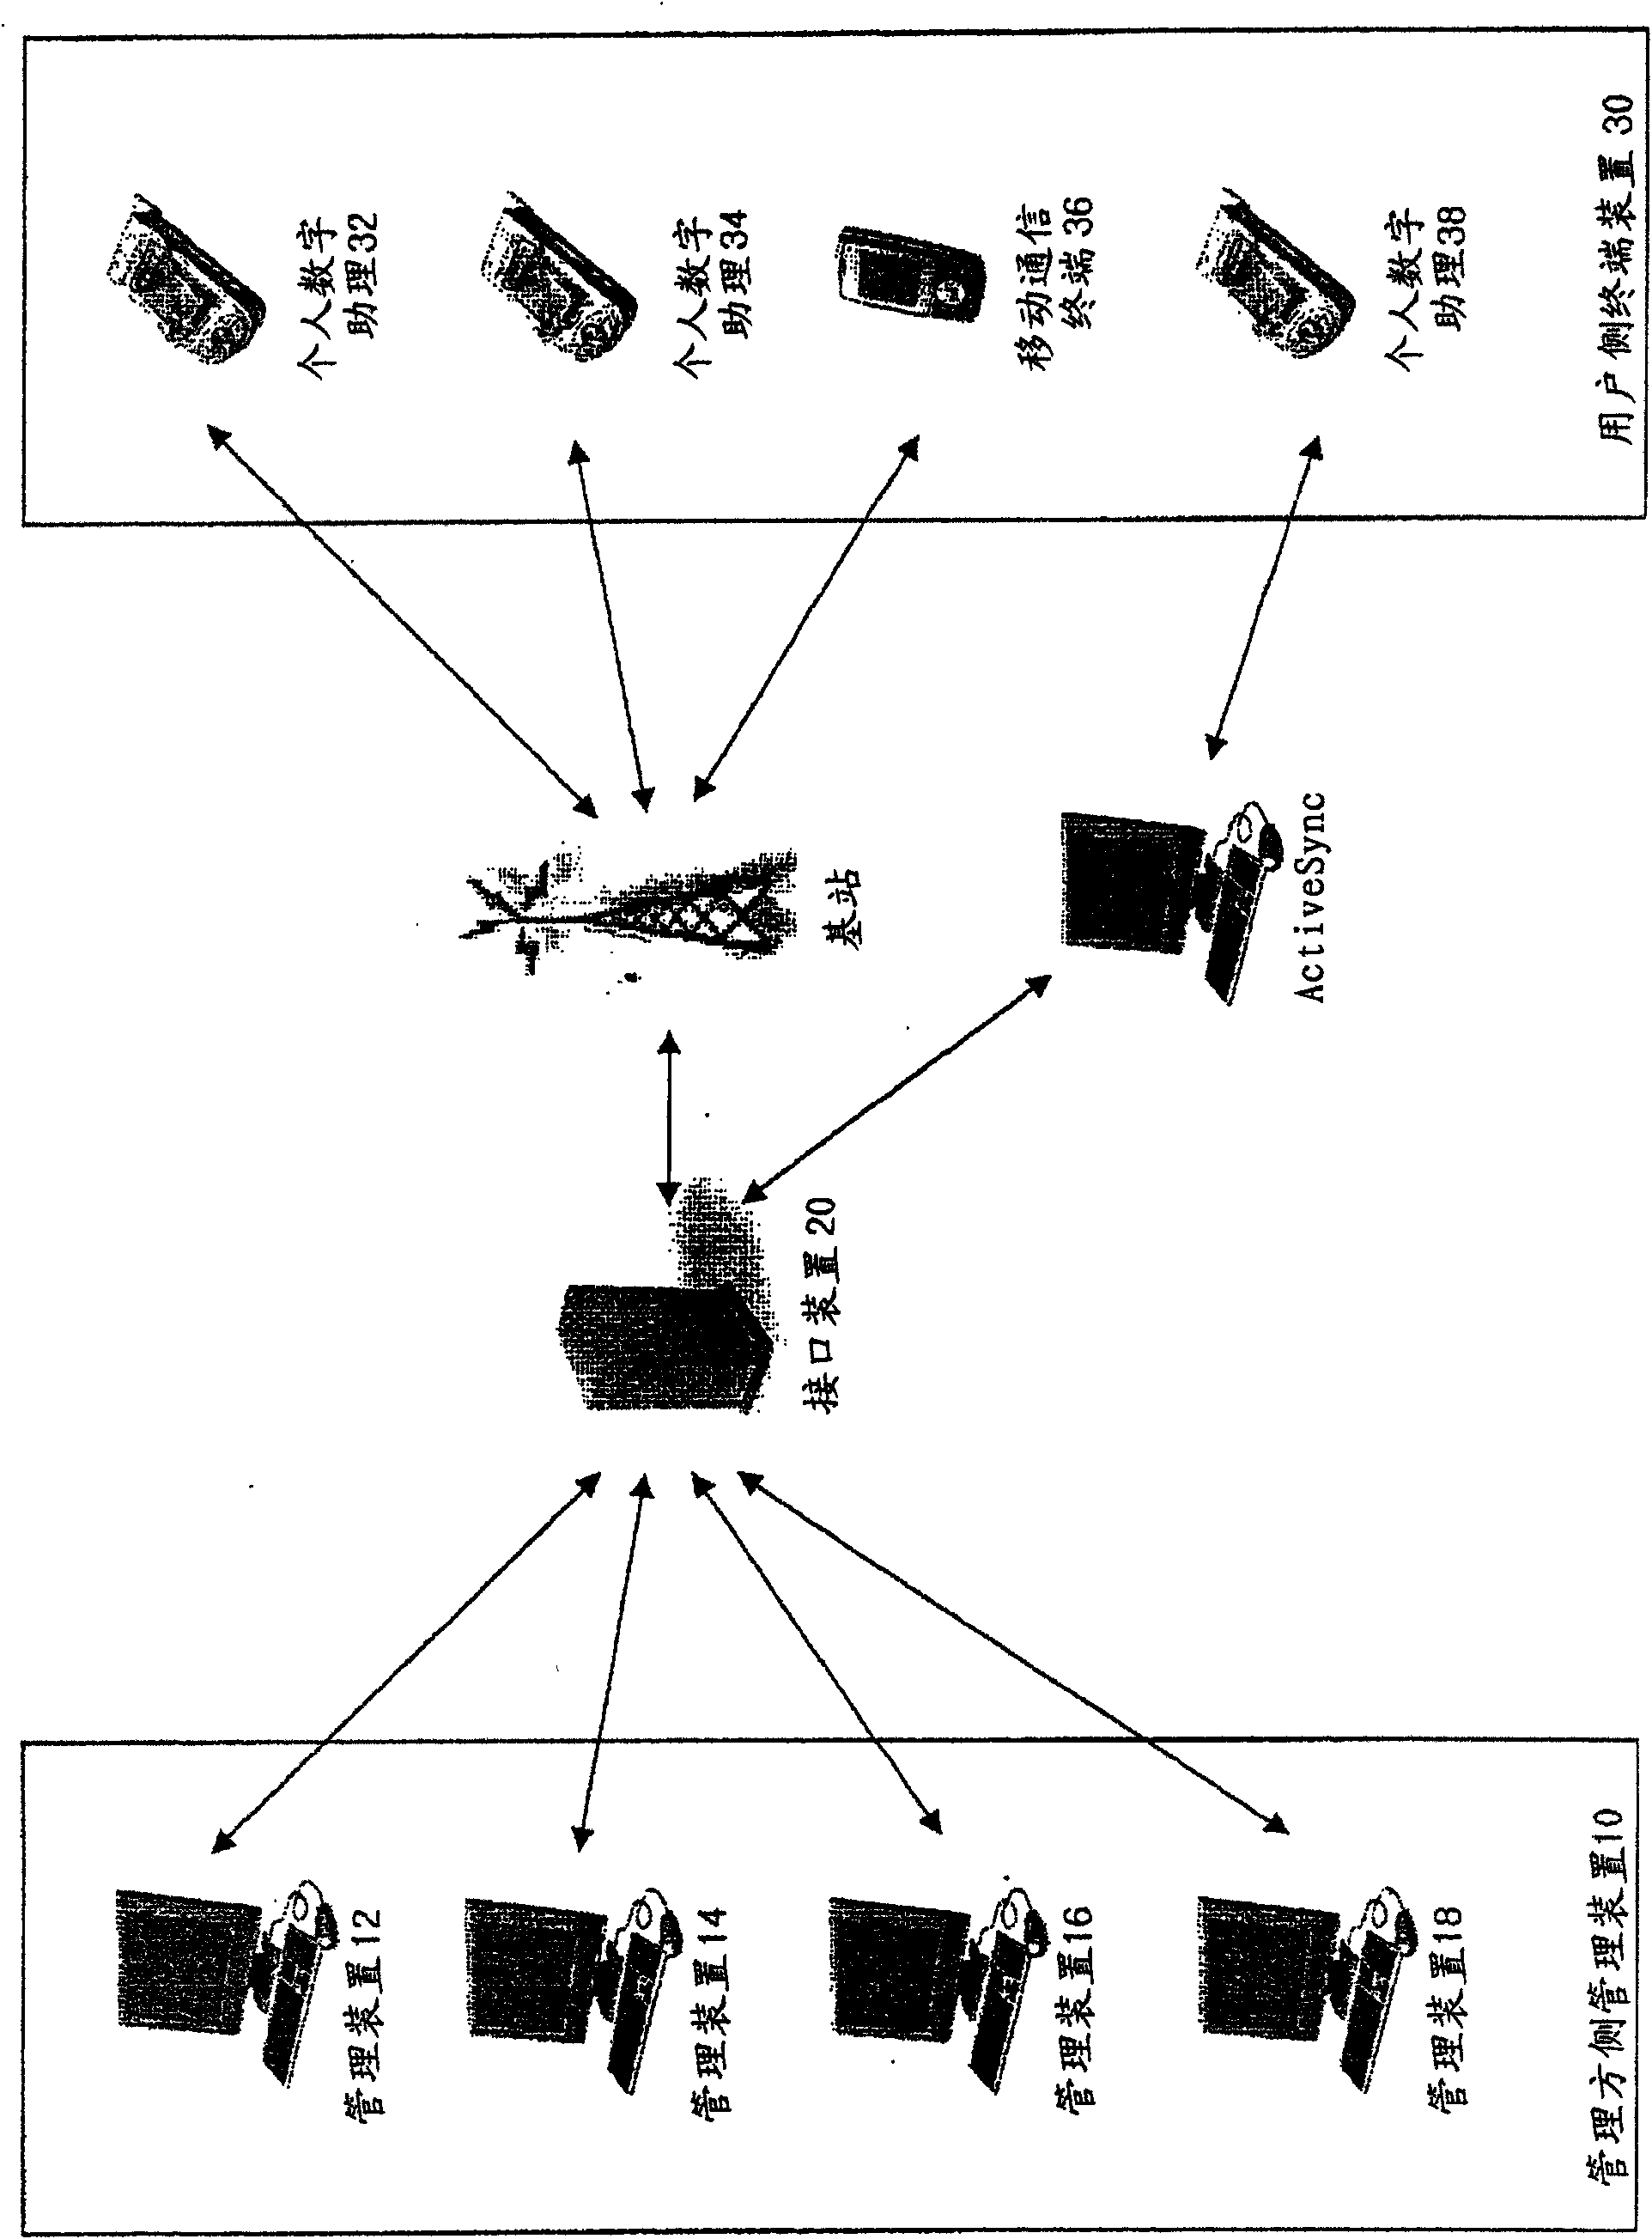 Terminating apparatus management system and an interface device and corresponding method, recording media